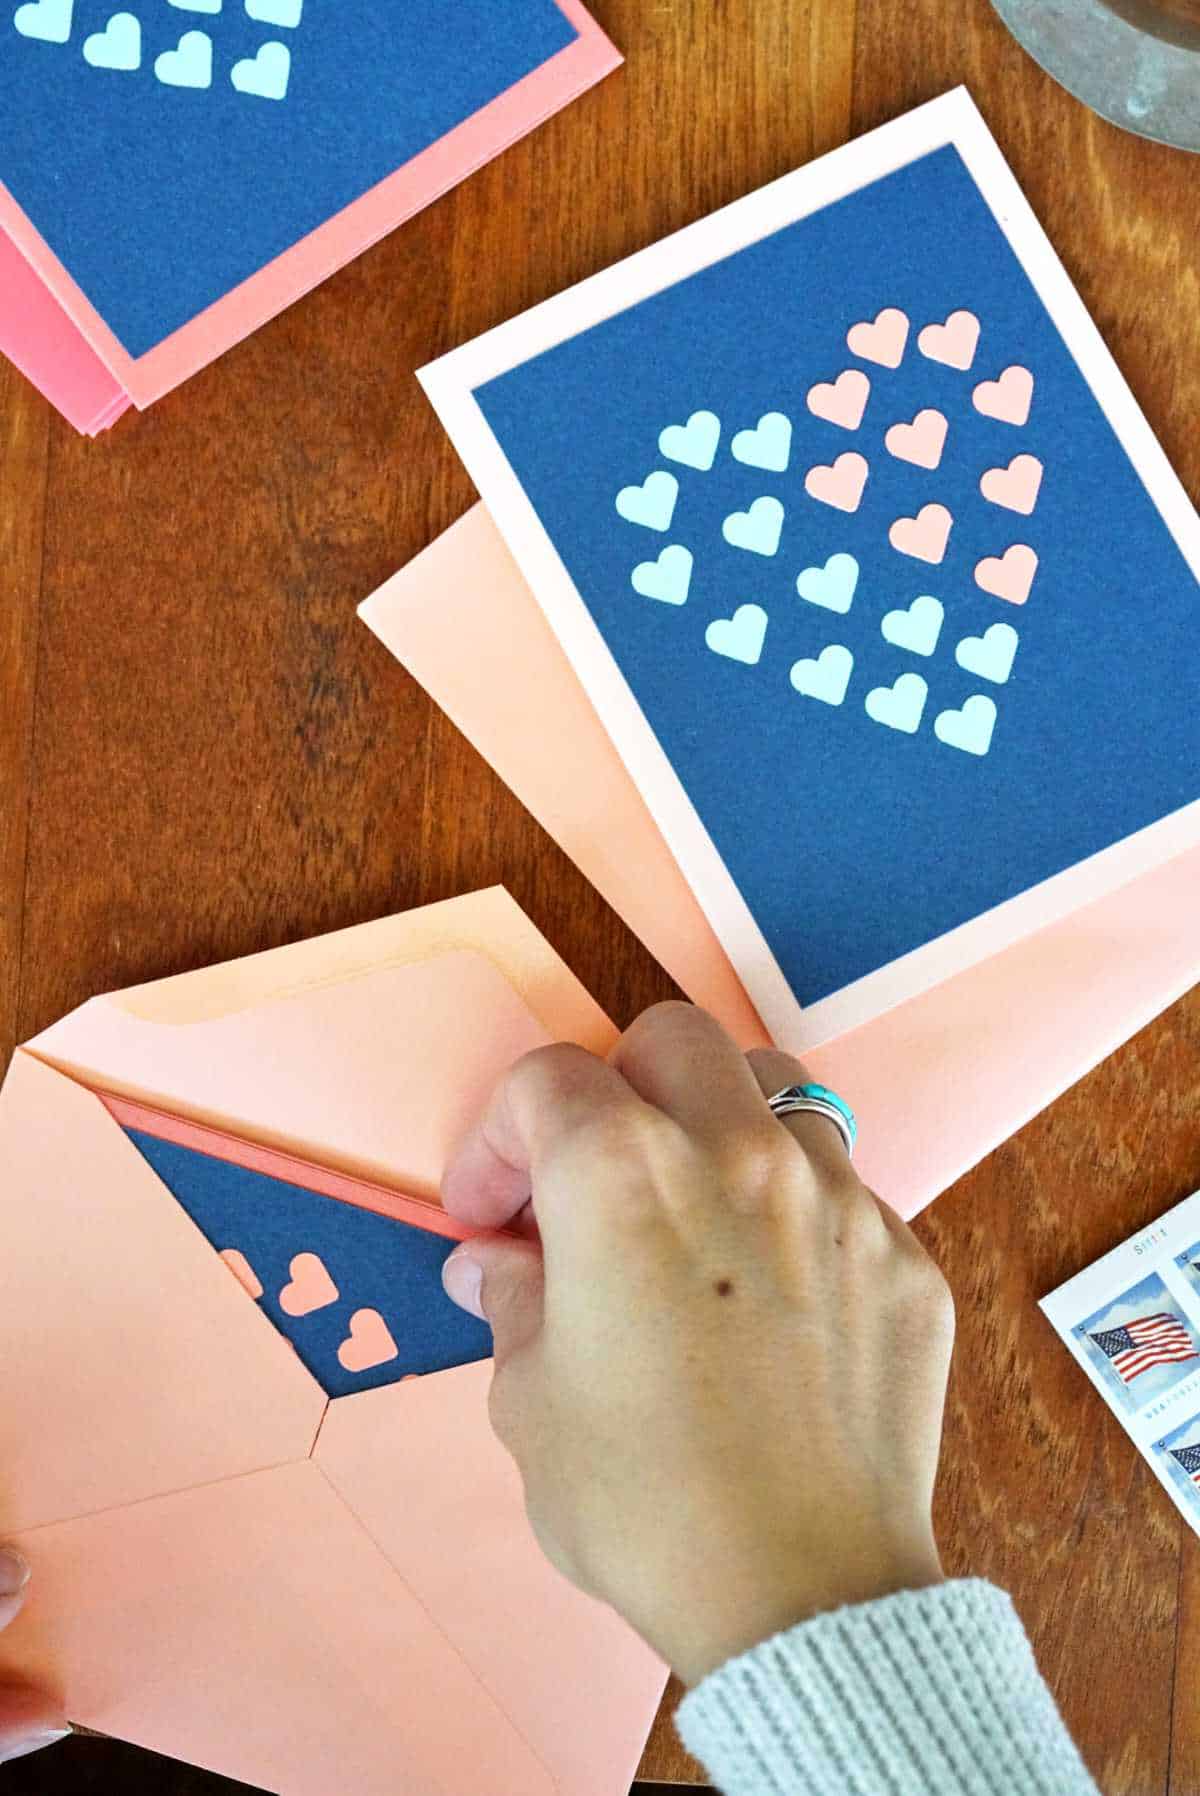 Putting cards with hearts into envelopes.